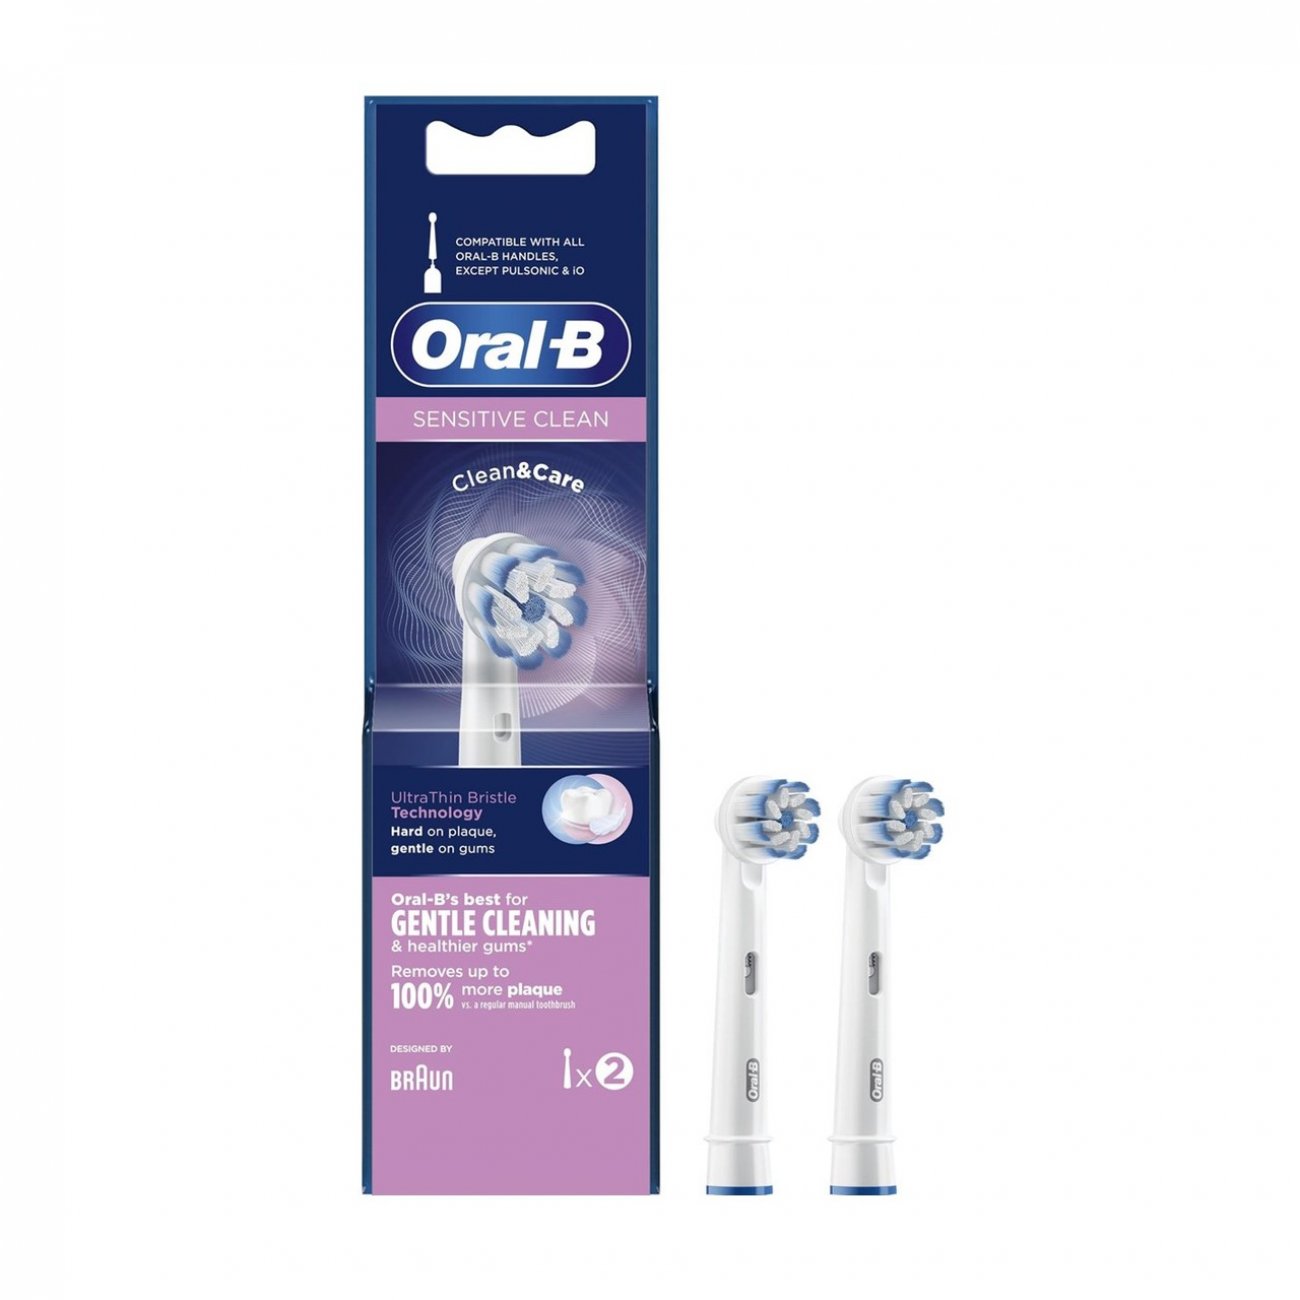 Namaak pit Induceren Kopen Oral-B Sensitive Clean Replacement Head Electric Toothbrush x2 ·  Nederland